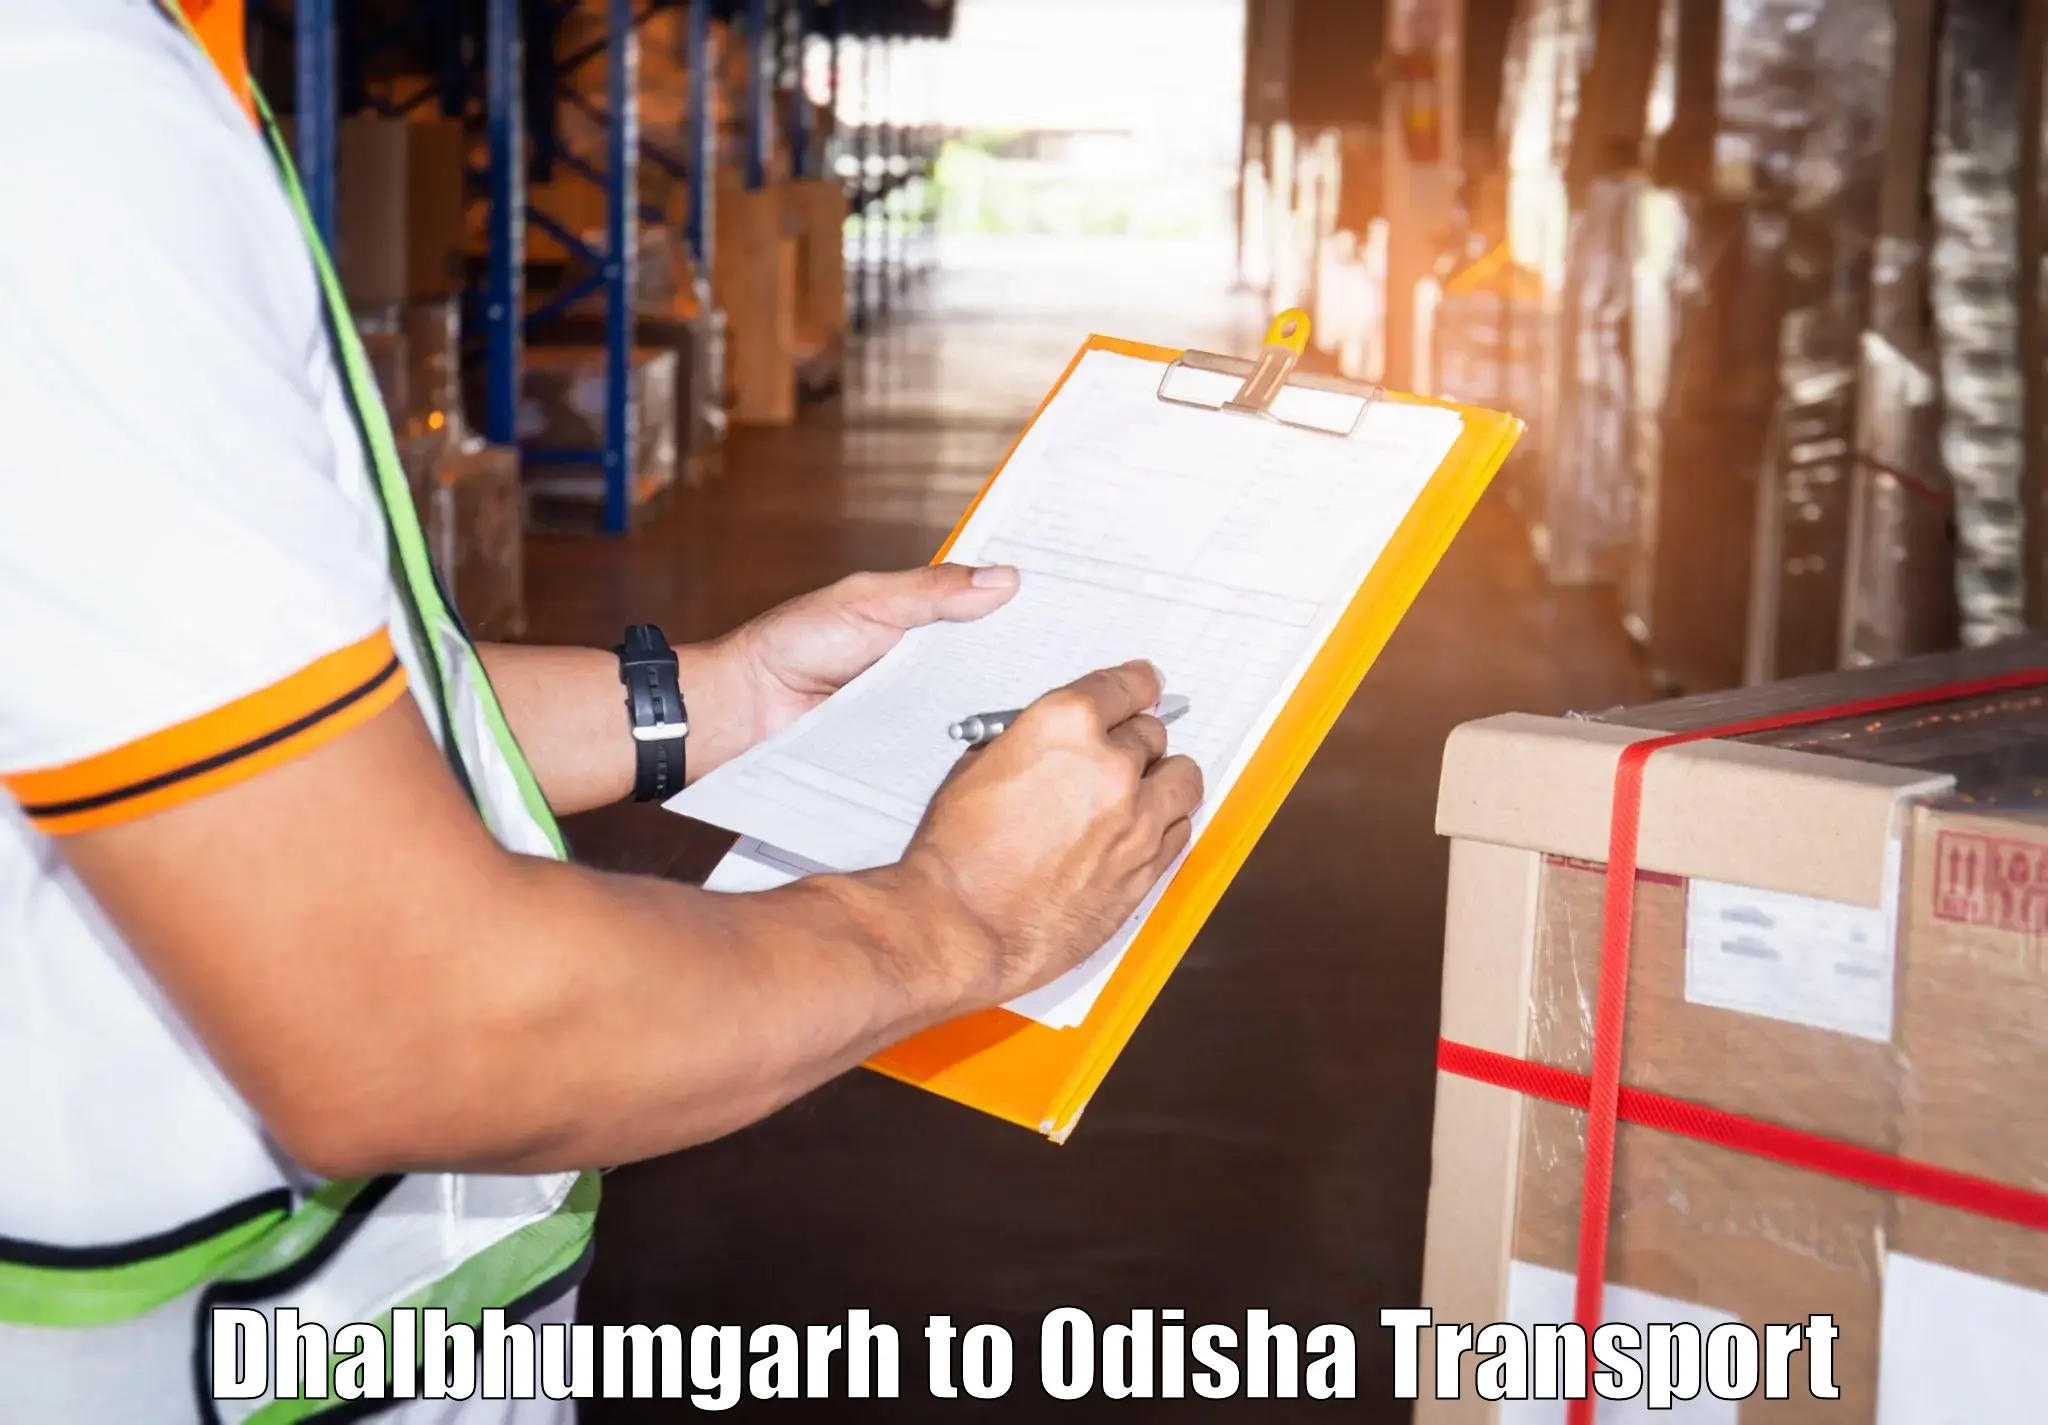 Container transportation services in Dhalbhumgarh to Chandipur